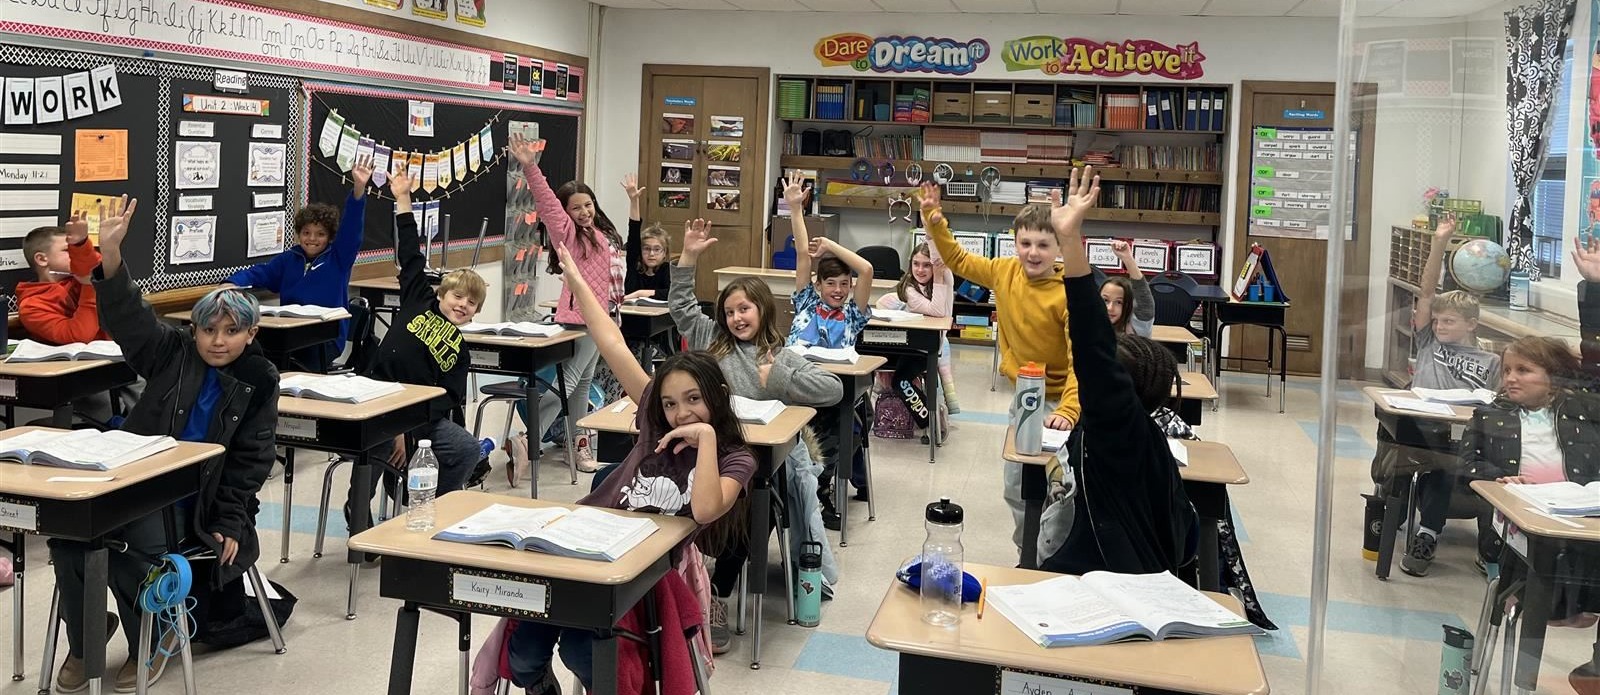 4th grade students raising hands in class